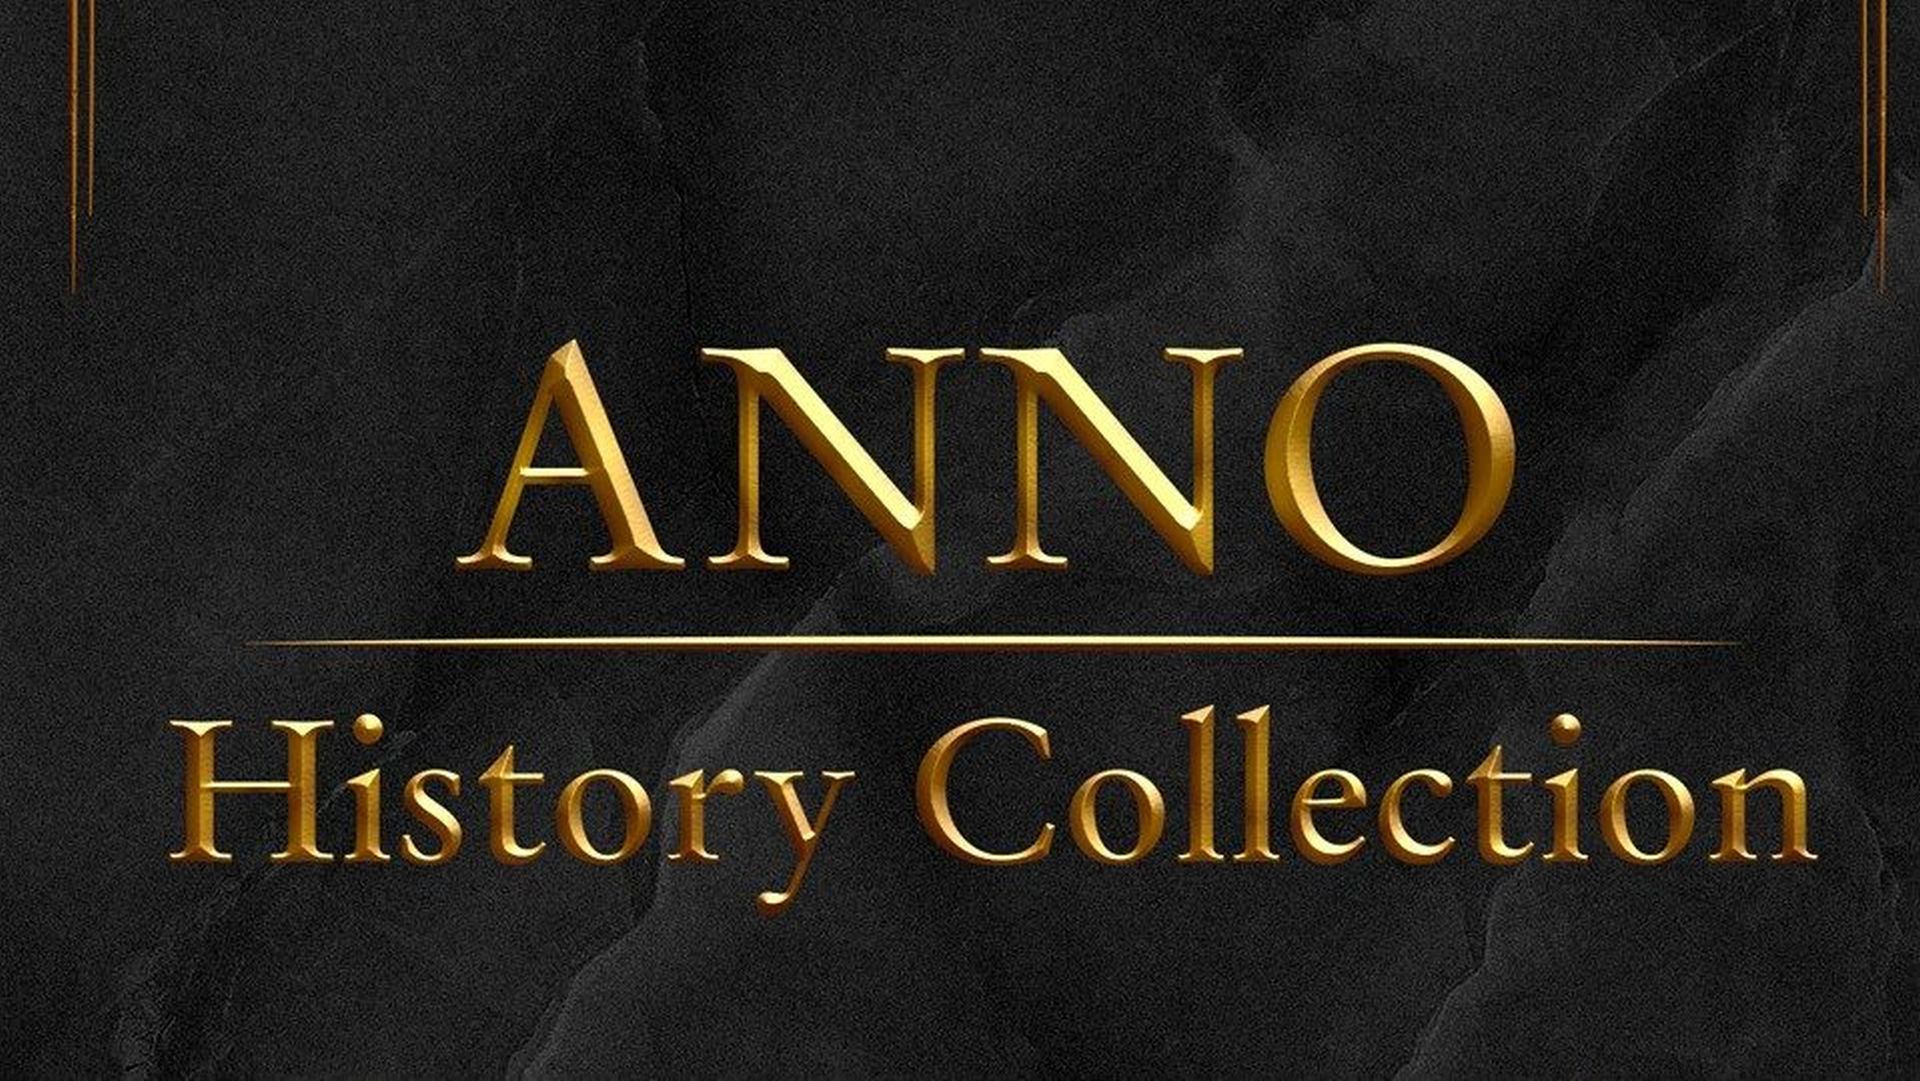 Anno History Collection Announced, Contains 4 Classic Titles With 4K Support